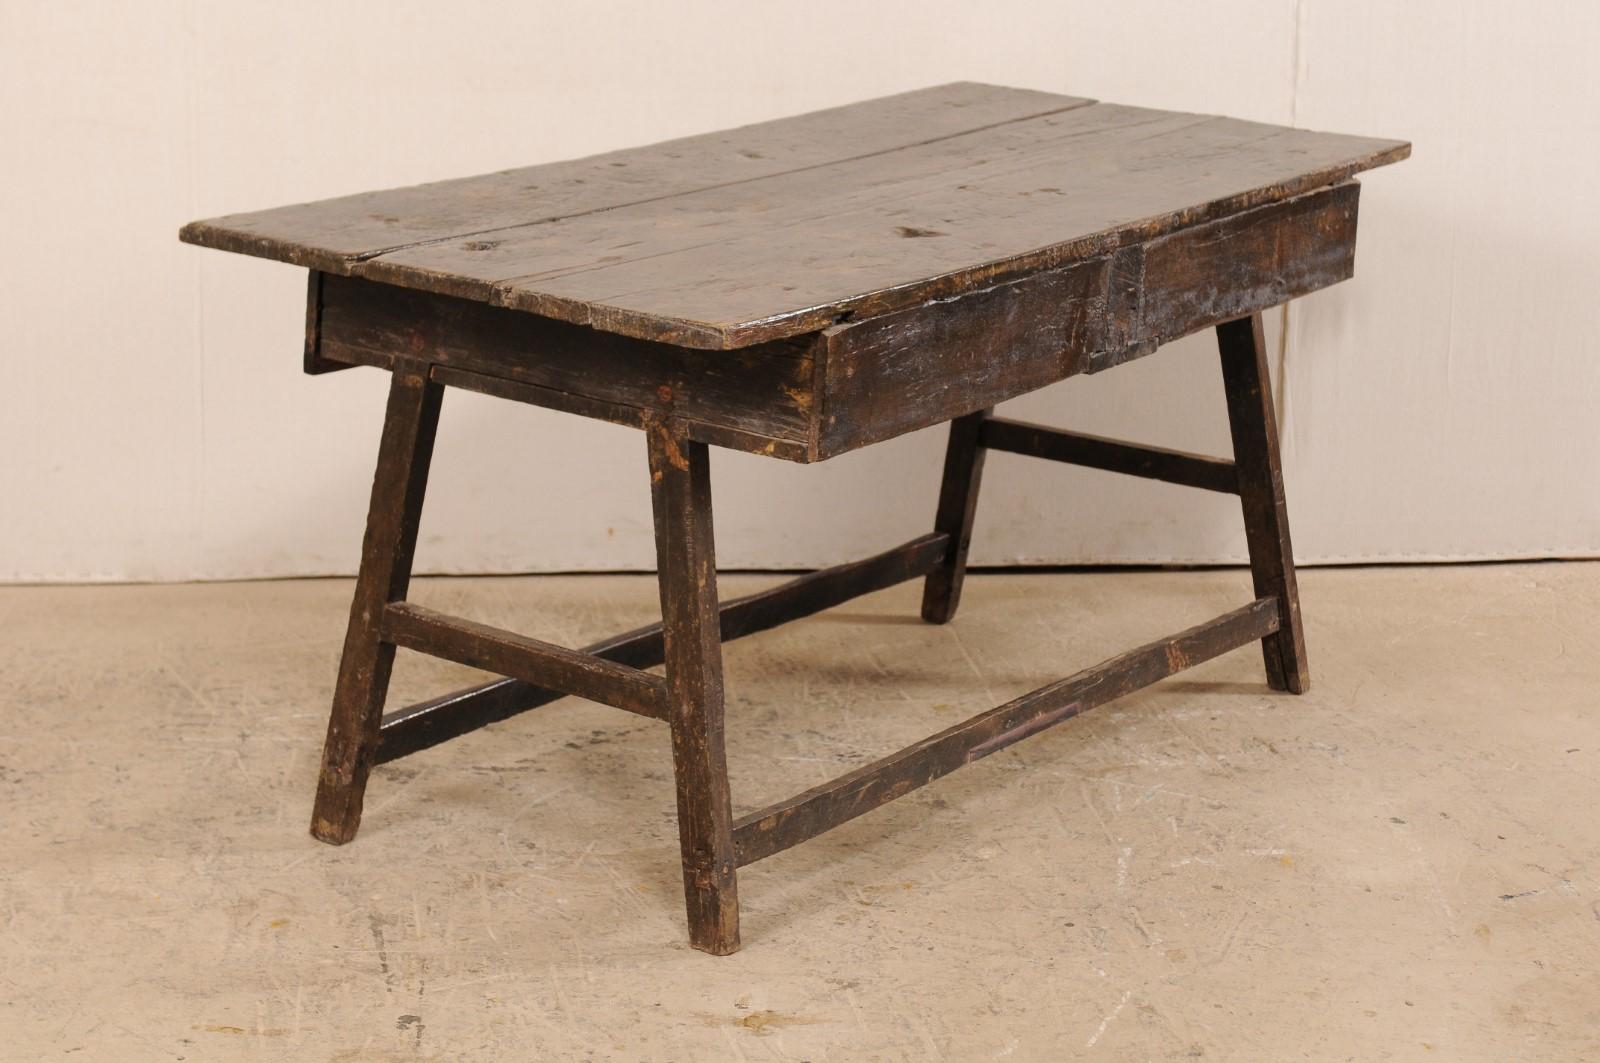 Late 17th C. Brazilian Peroba Wood Console Table w/Drawers & Sawhorse Style Legs For Sale 3